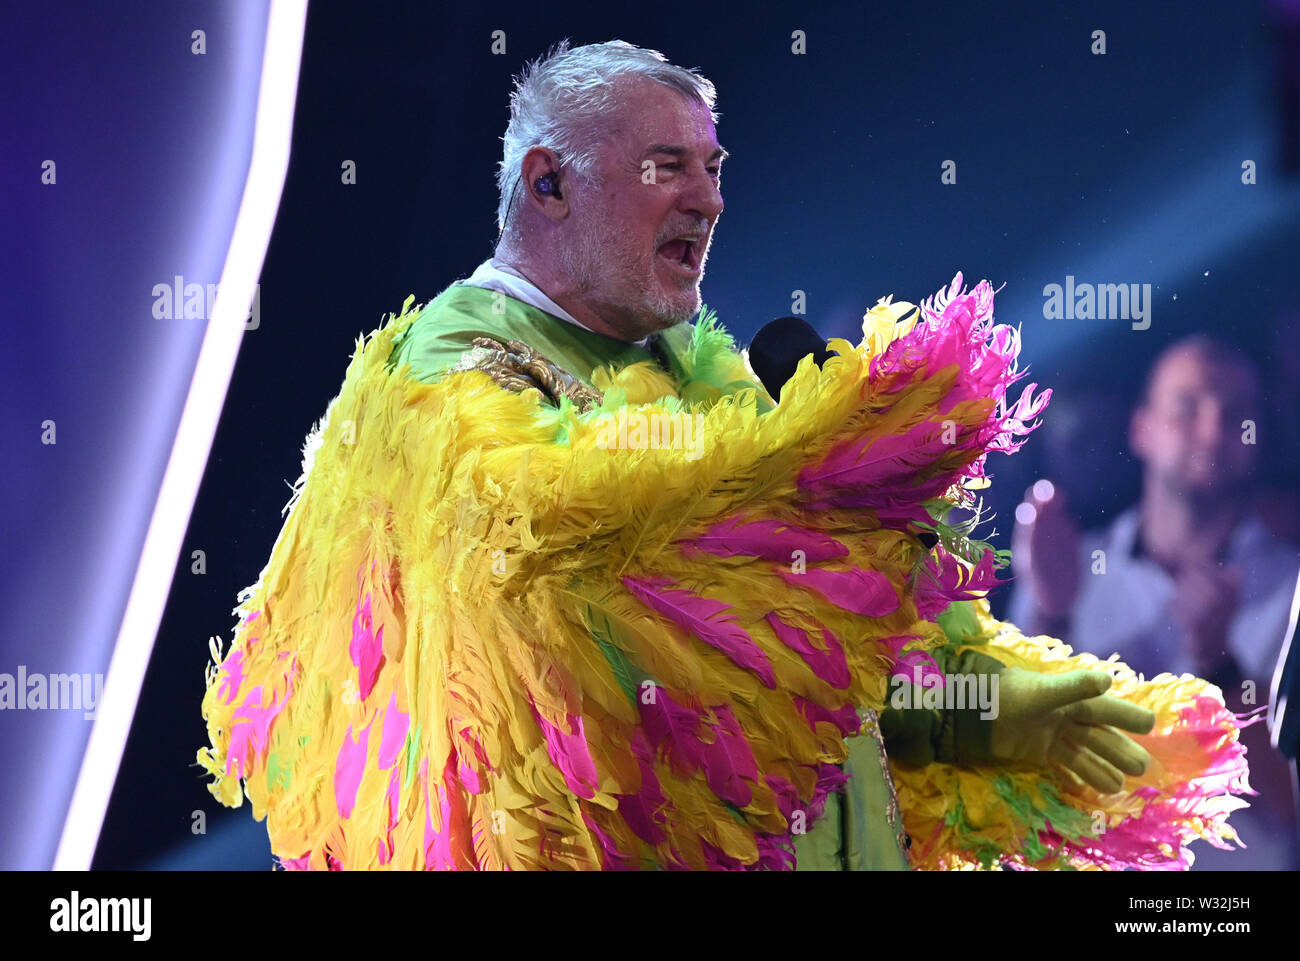 Cologne, Germany. 11th July, 2019. The actor Heinz Hoenig stands on stage  as "Kakadu" at the ProSieben show "The Masked Singer". Credit: Henning  Kaiser/dpa/Alamy Live News Stock Photo - Alamy